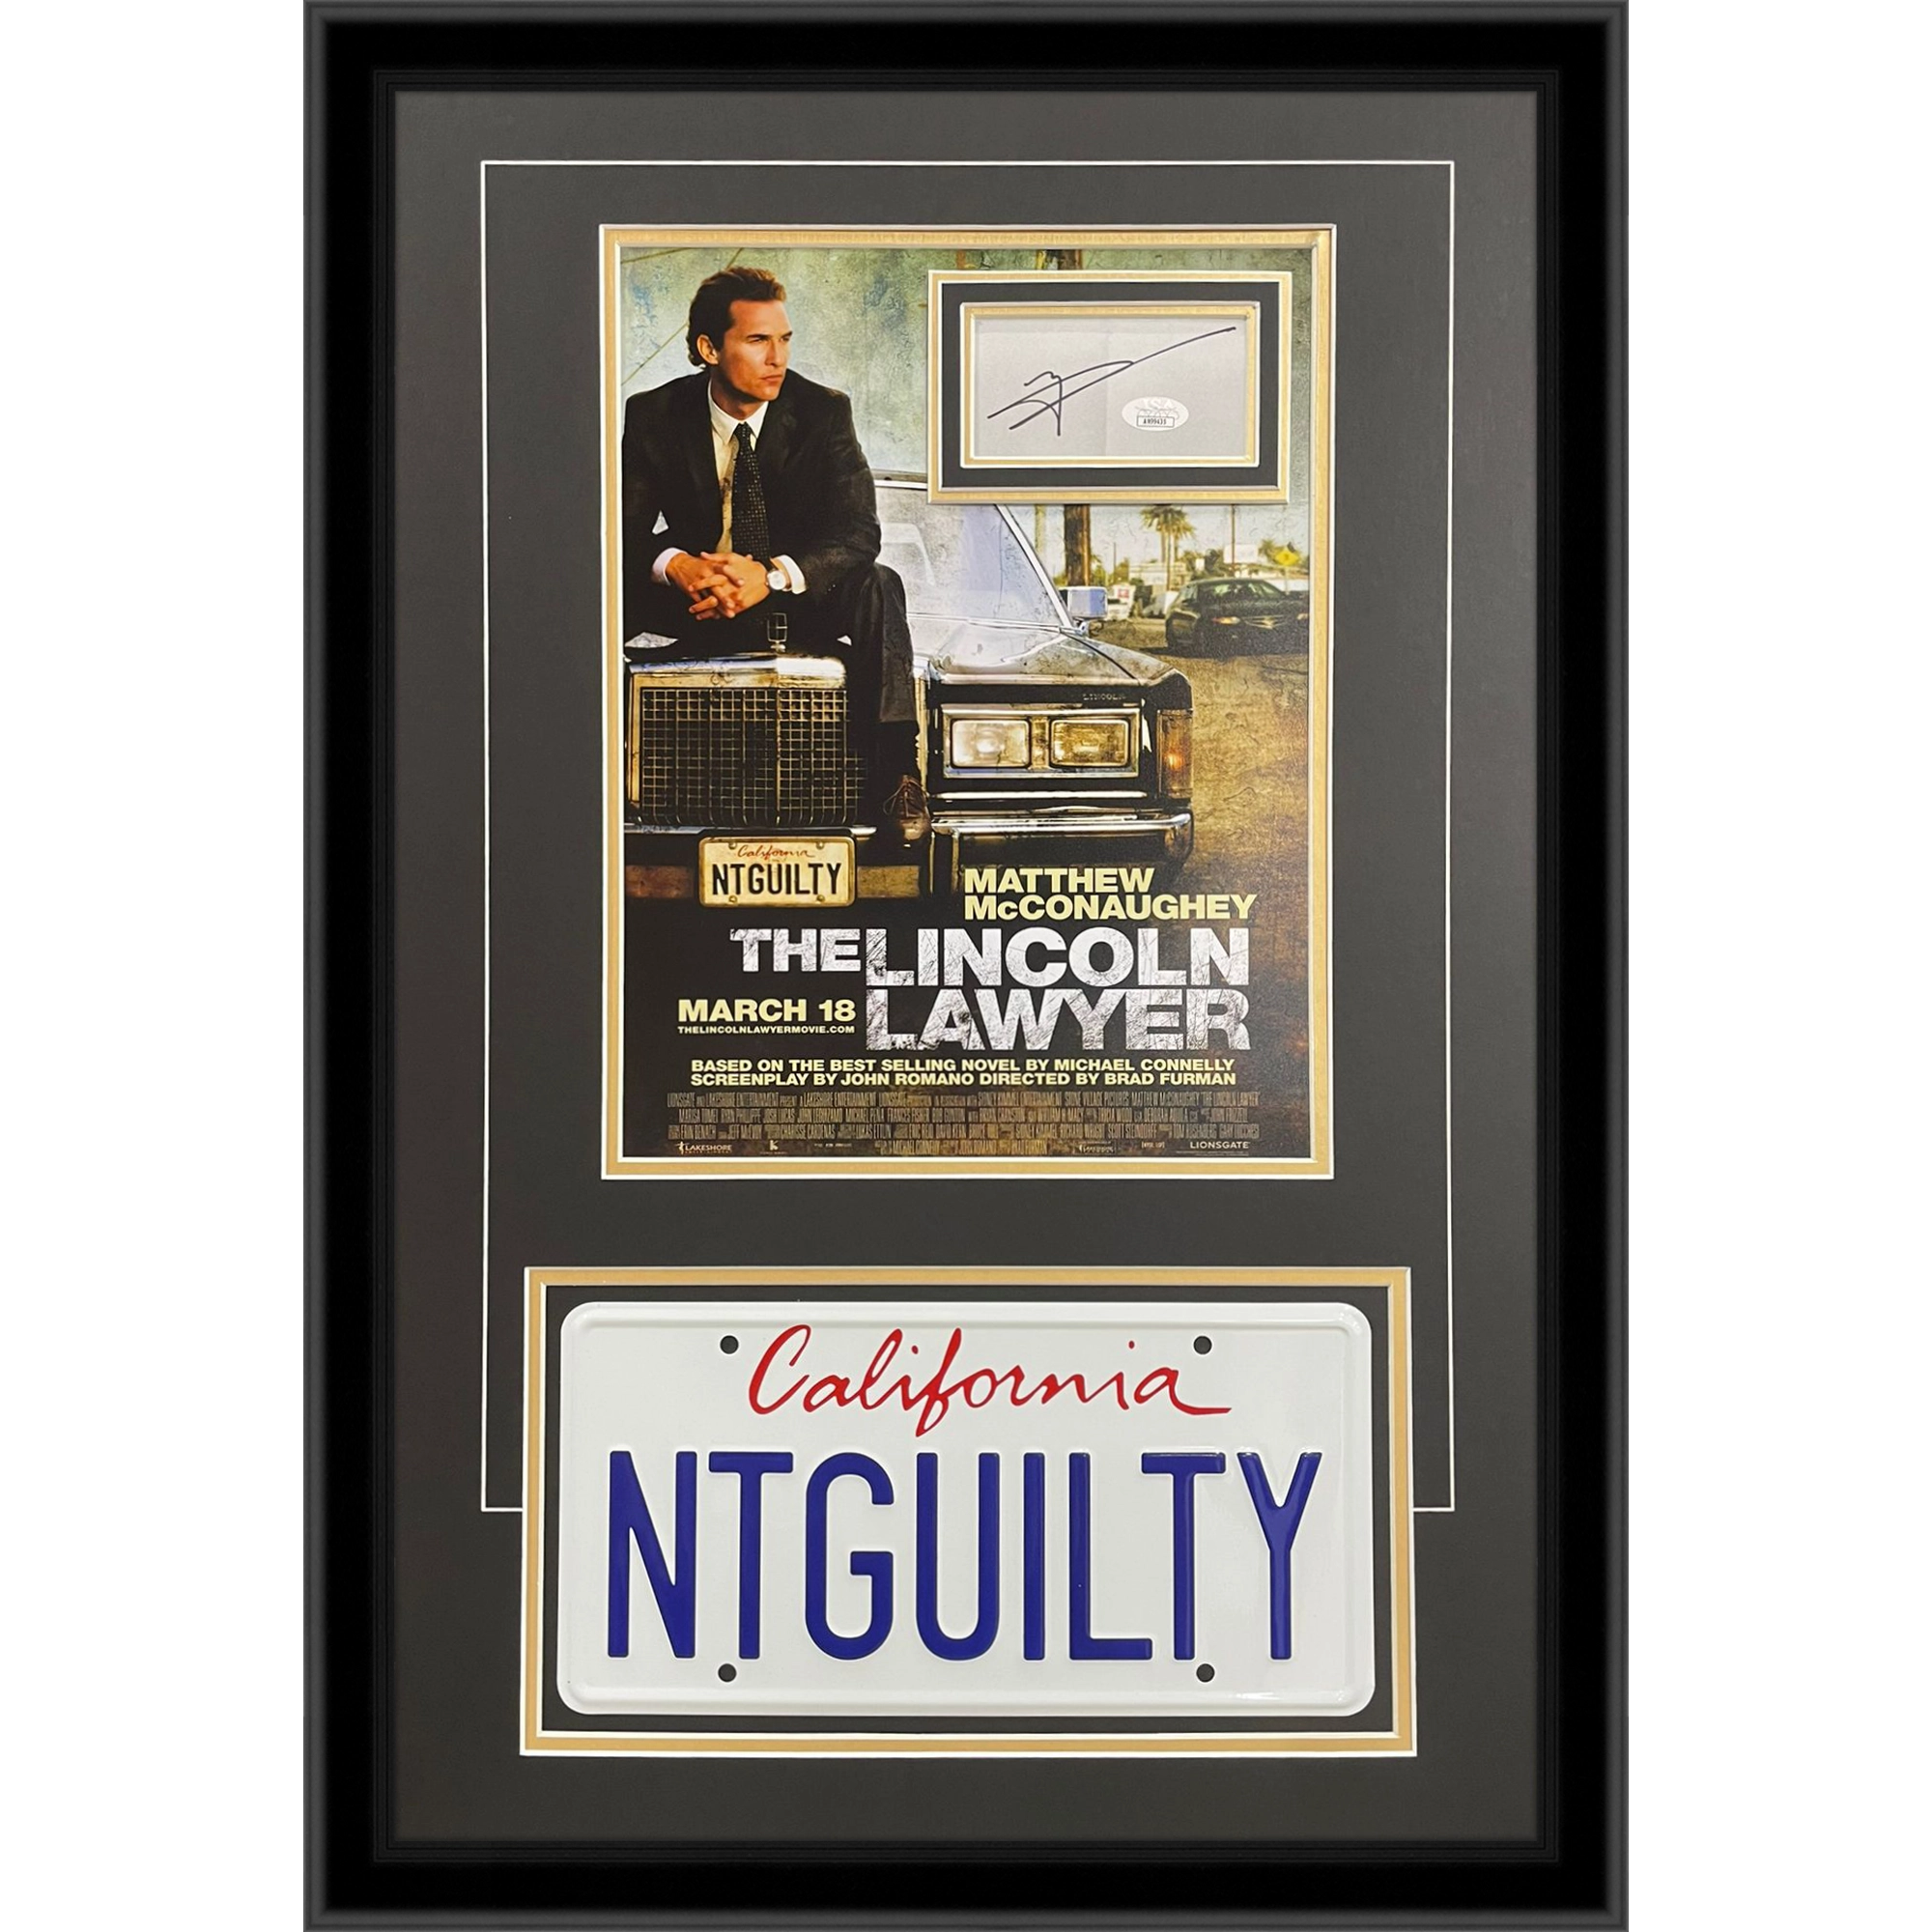 Matthew McConaughey Autographed Lincoln Lawyer Deluxe Framed Piece with 11x14 Movie Poster and NTGUILTY License Plate - JSA